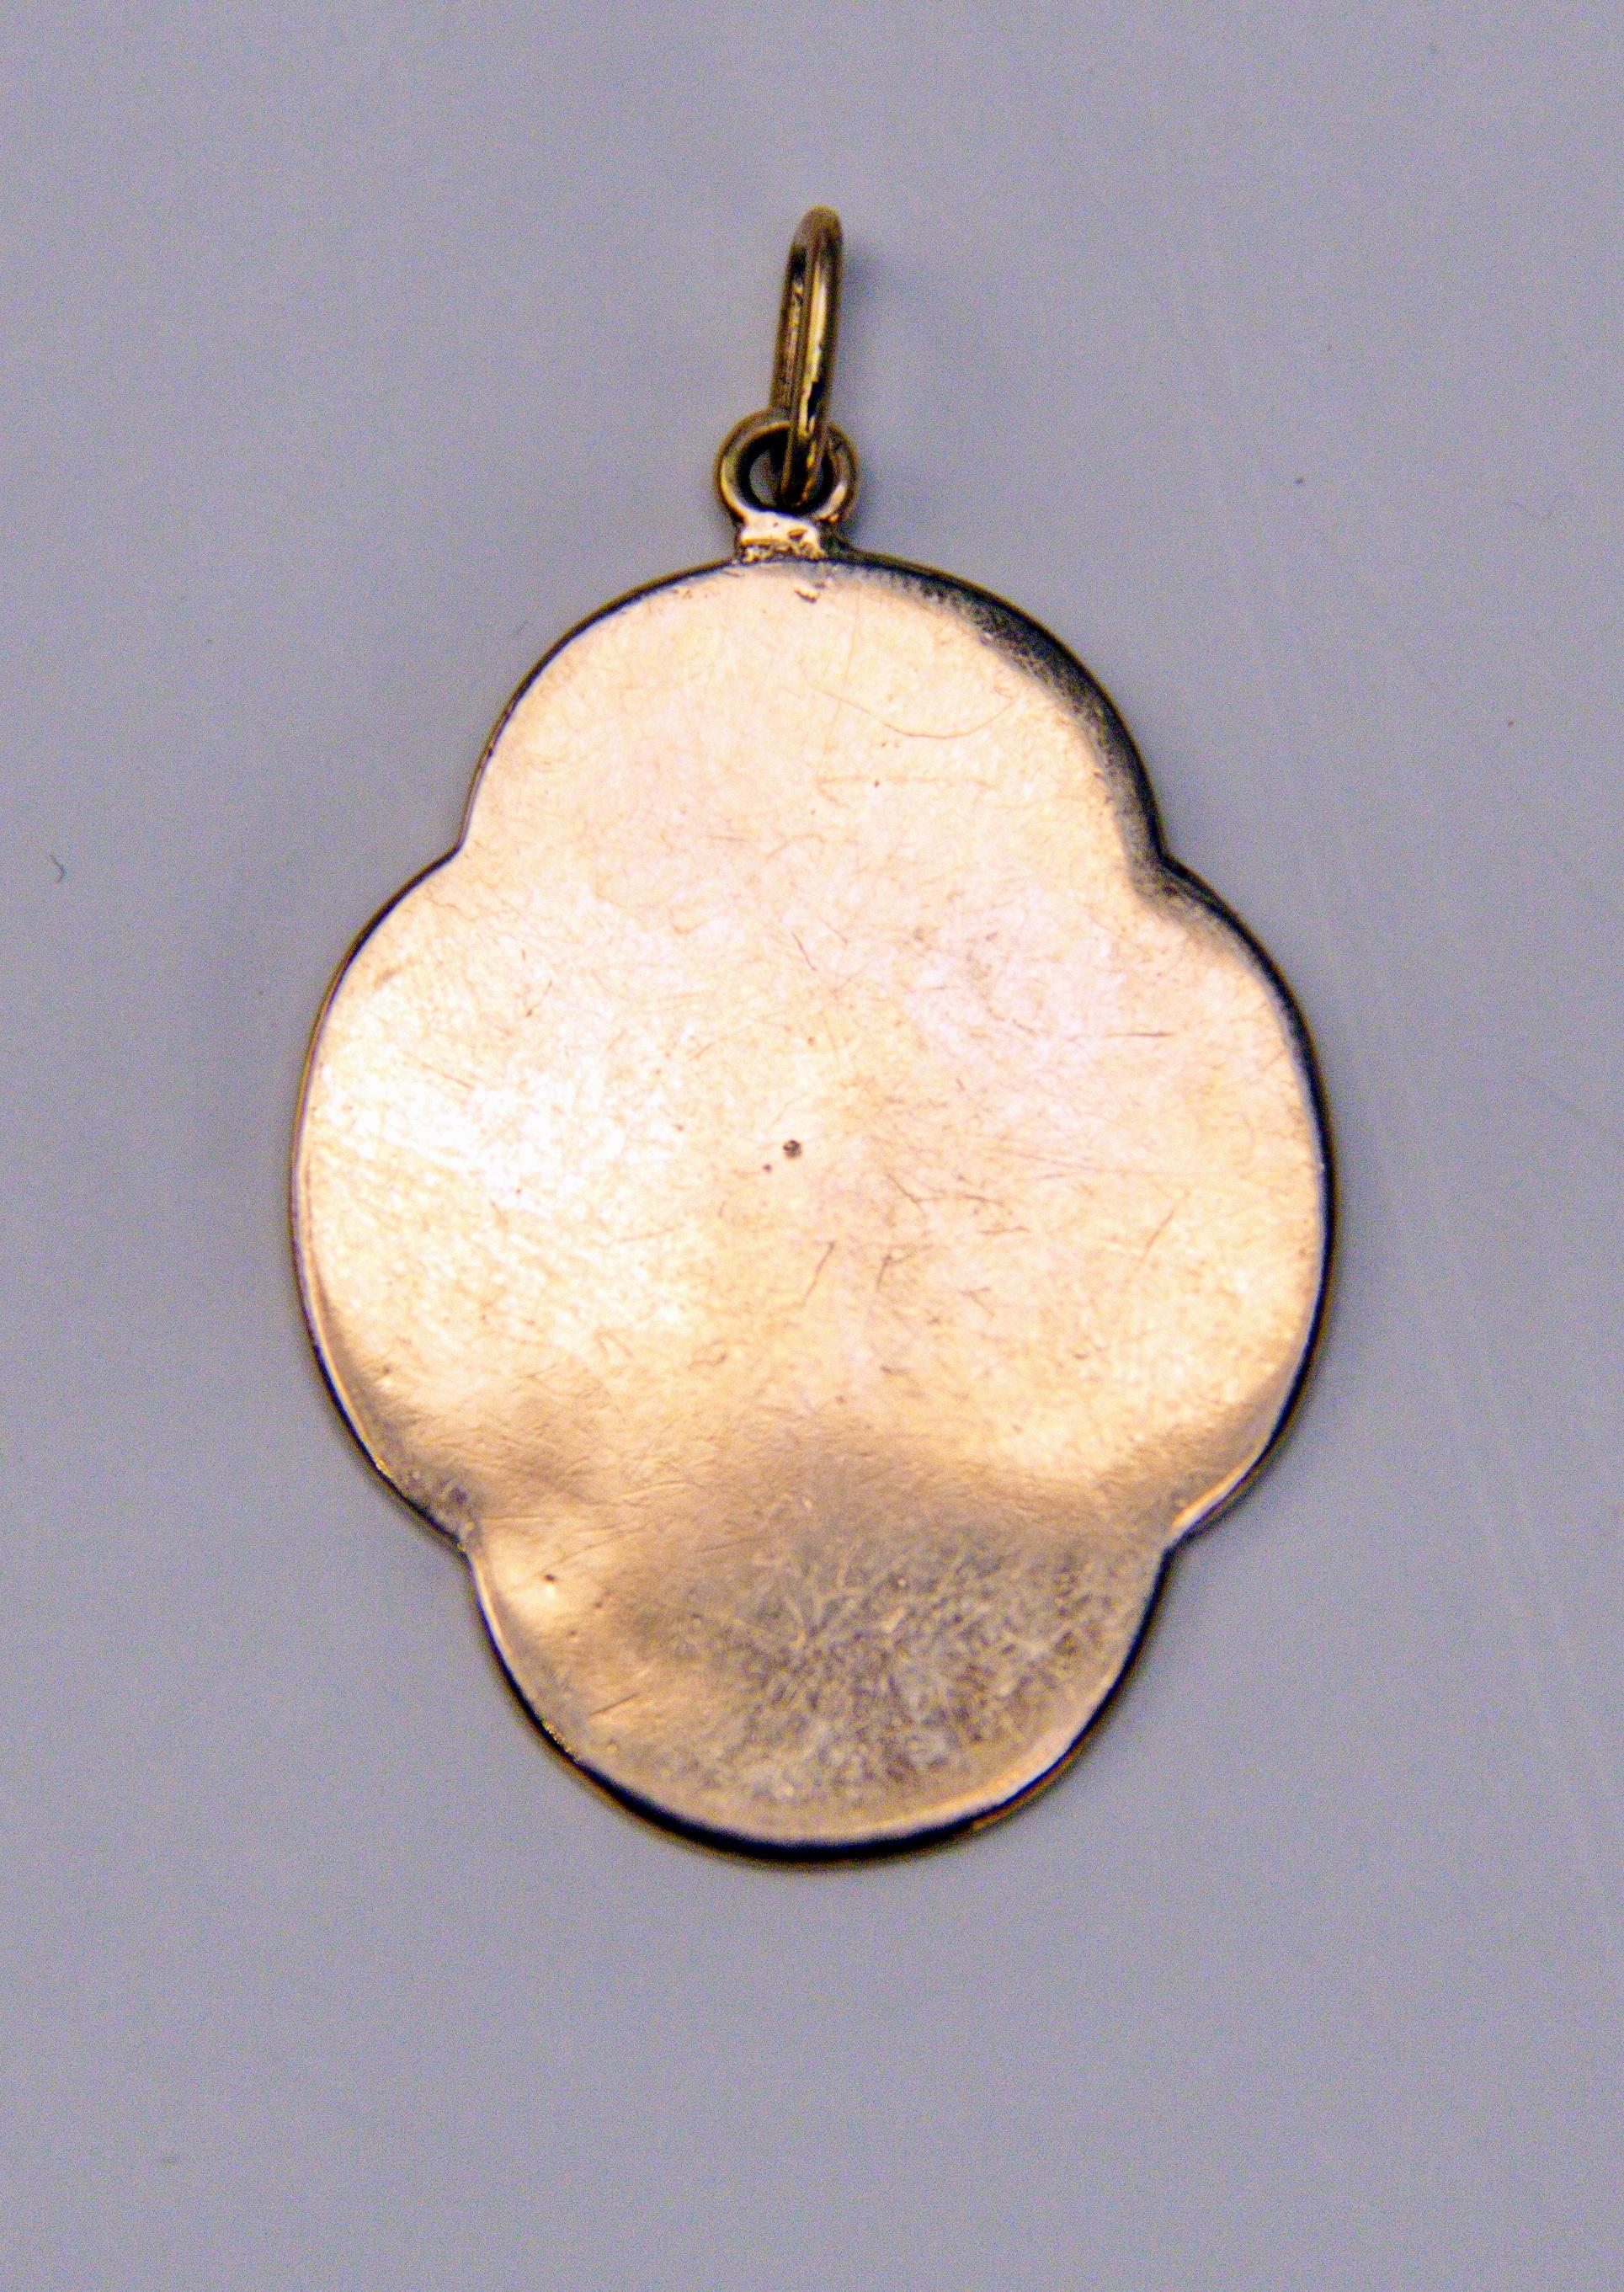 Golden Pendant of lovely appearance, manufactured as following:
Pendant made of porcelain is of oval form type / its edges are waved. The pendant's front side is painted (= enamel painting)  with picture of VIRGIN MARY - clad in white dress and blue